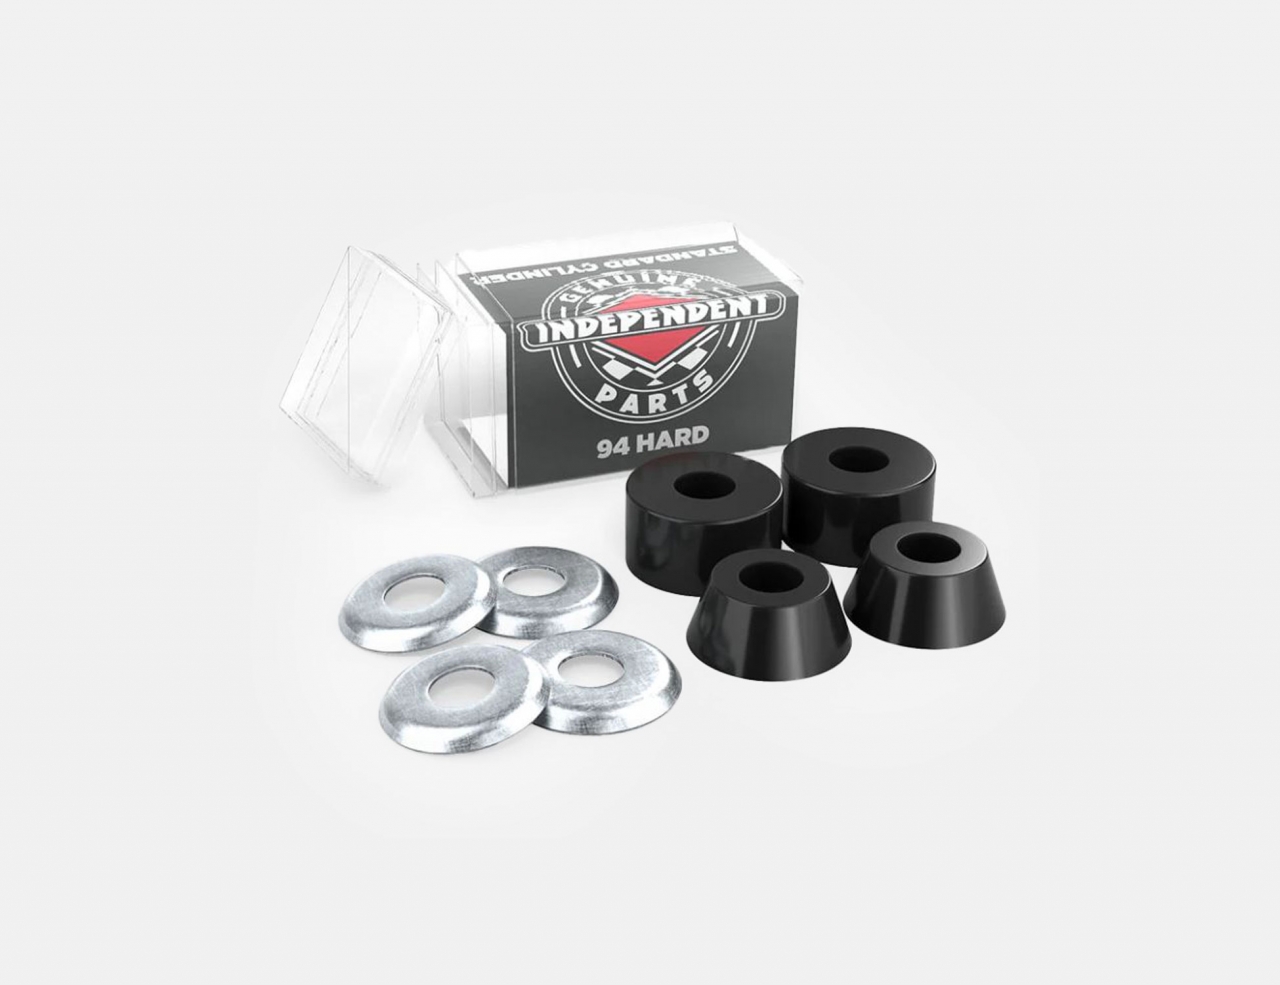 Independent Standard Cylinder Cushions Hard 94A Bushings - Black